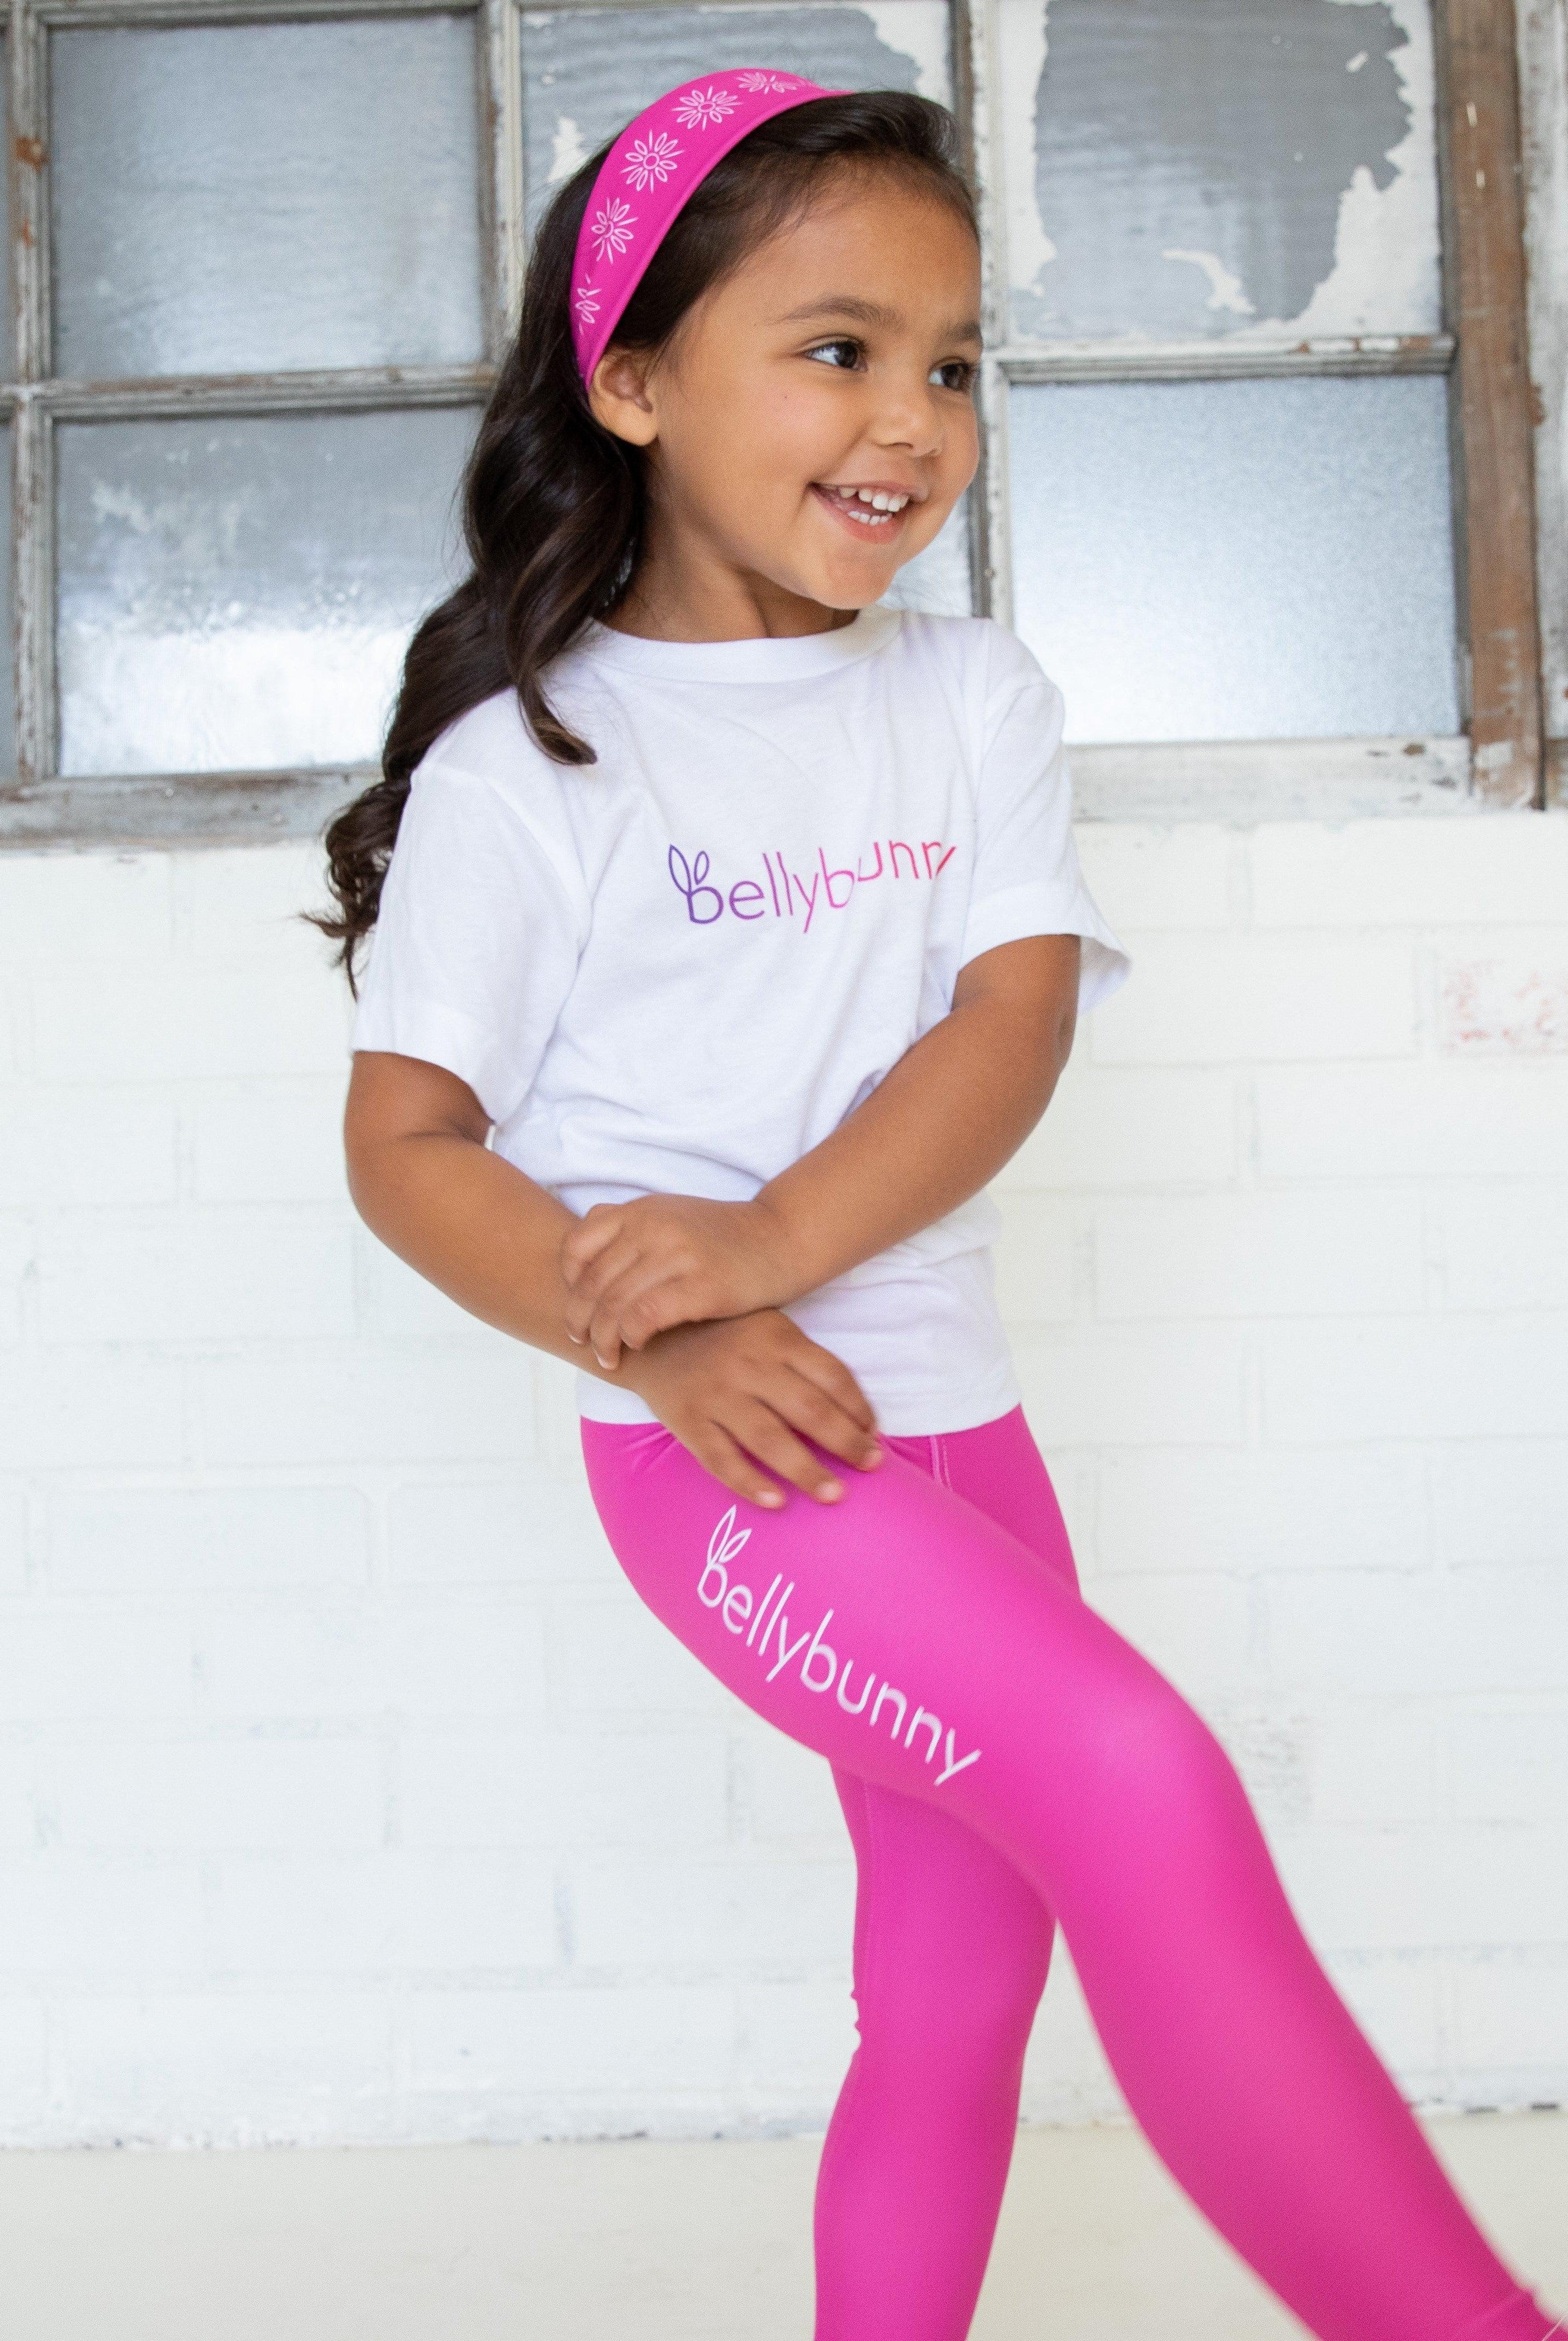 Bellybunny-Toddler Jersey T-Shirt